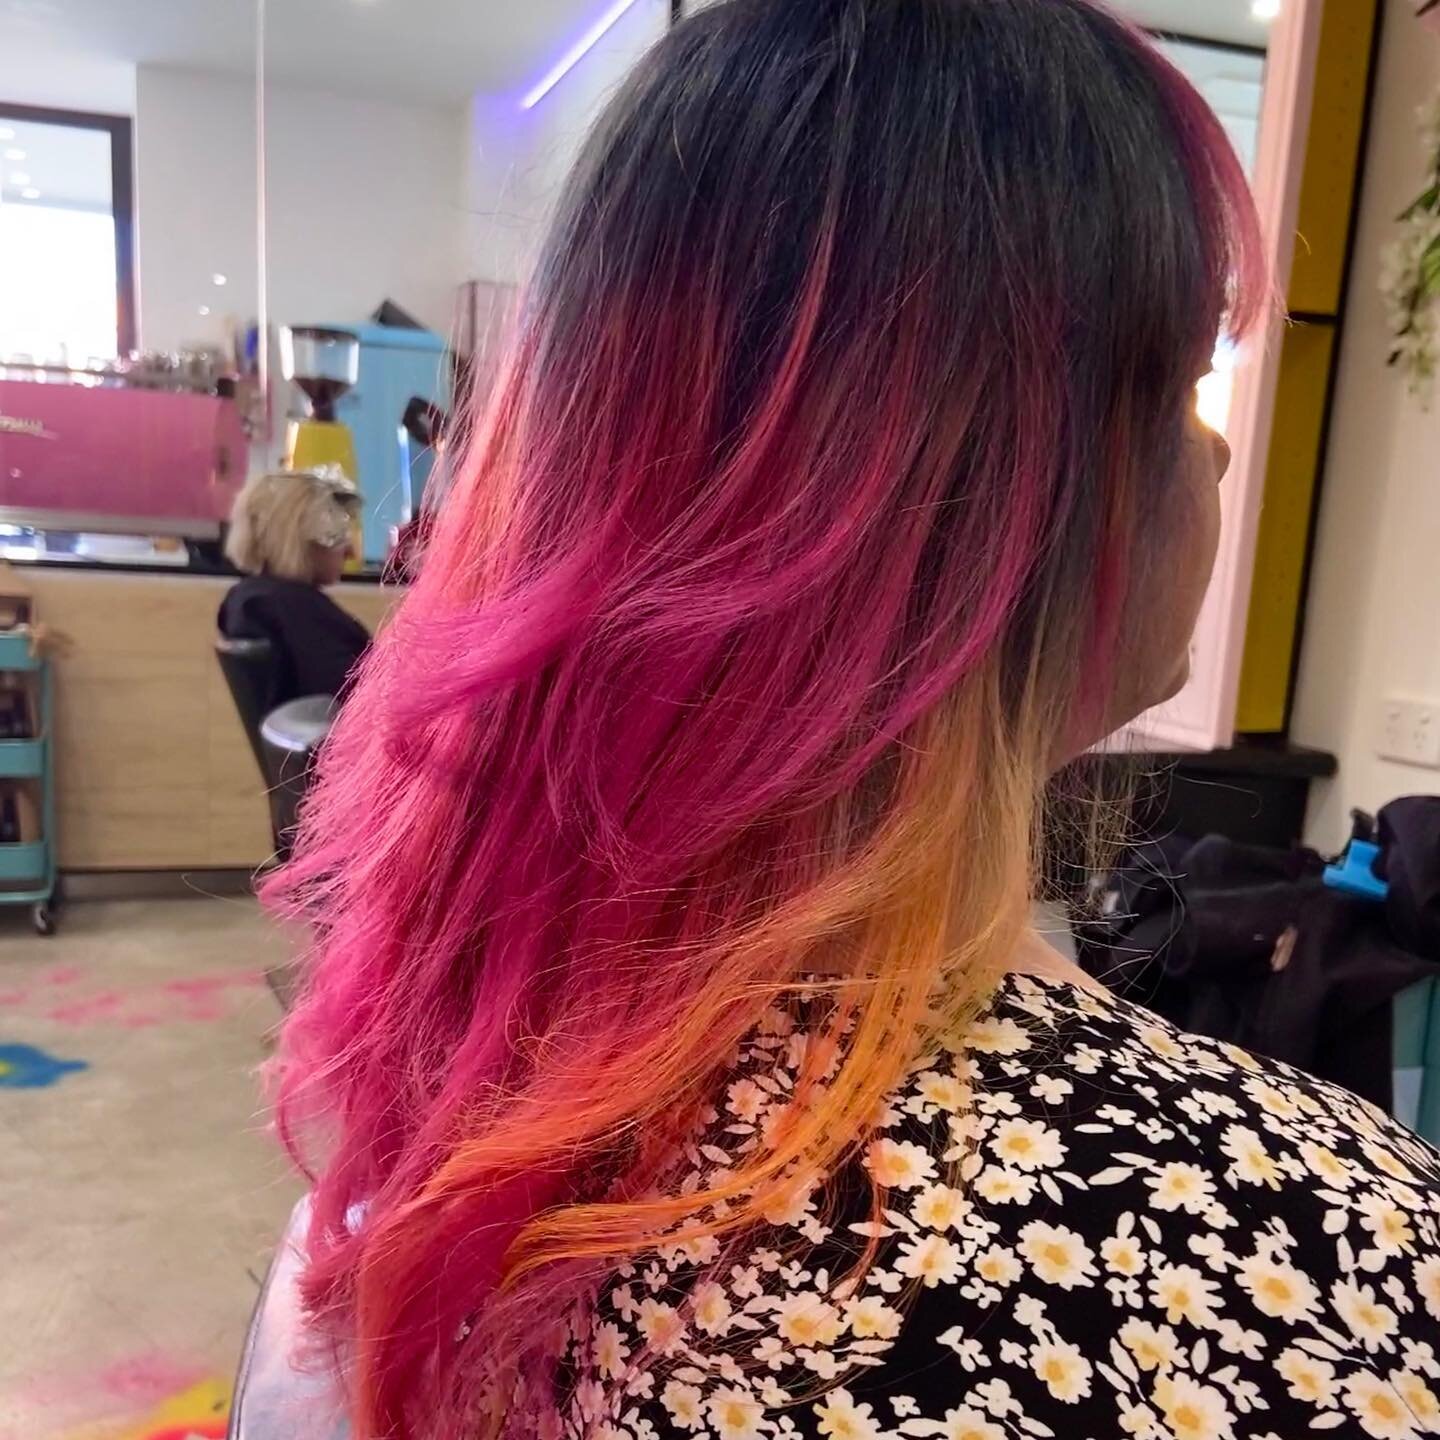 Dark grey and #pink #balayage with a peekaboo #orange and #yellow panel and pink #hairtattoo using @pulpriothair
🌟
To get this colour we had to bleach all the hair. There was at least 18 months worth of regrowth and a washed out green tone on the ol